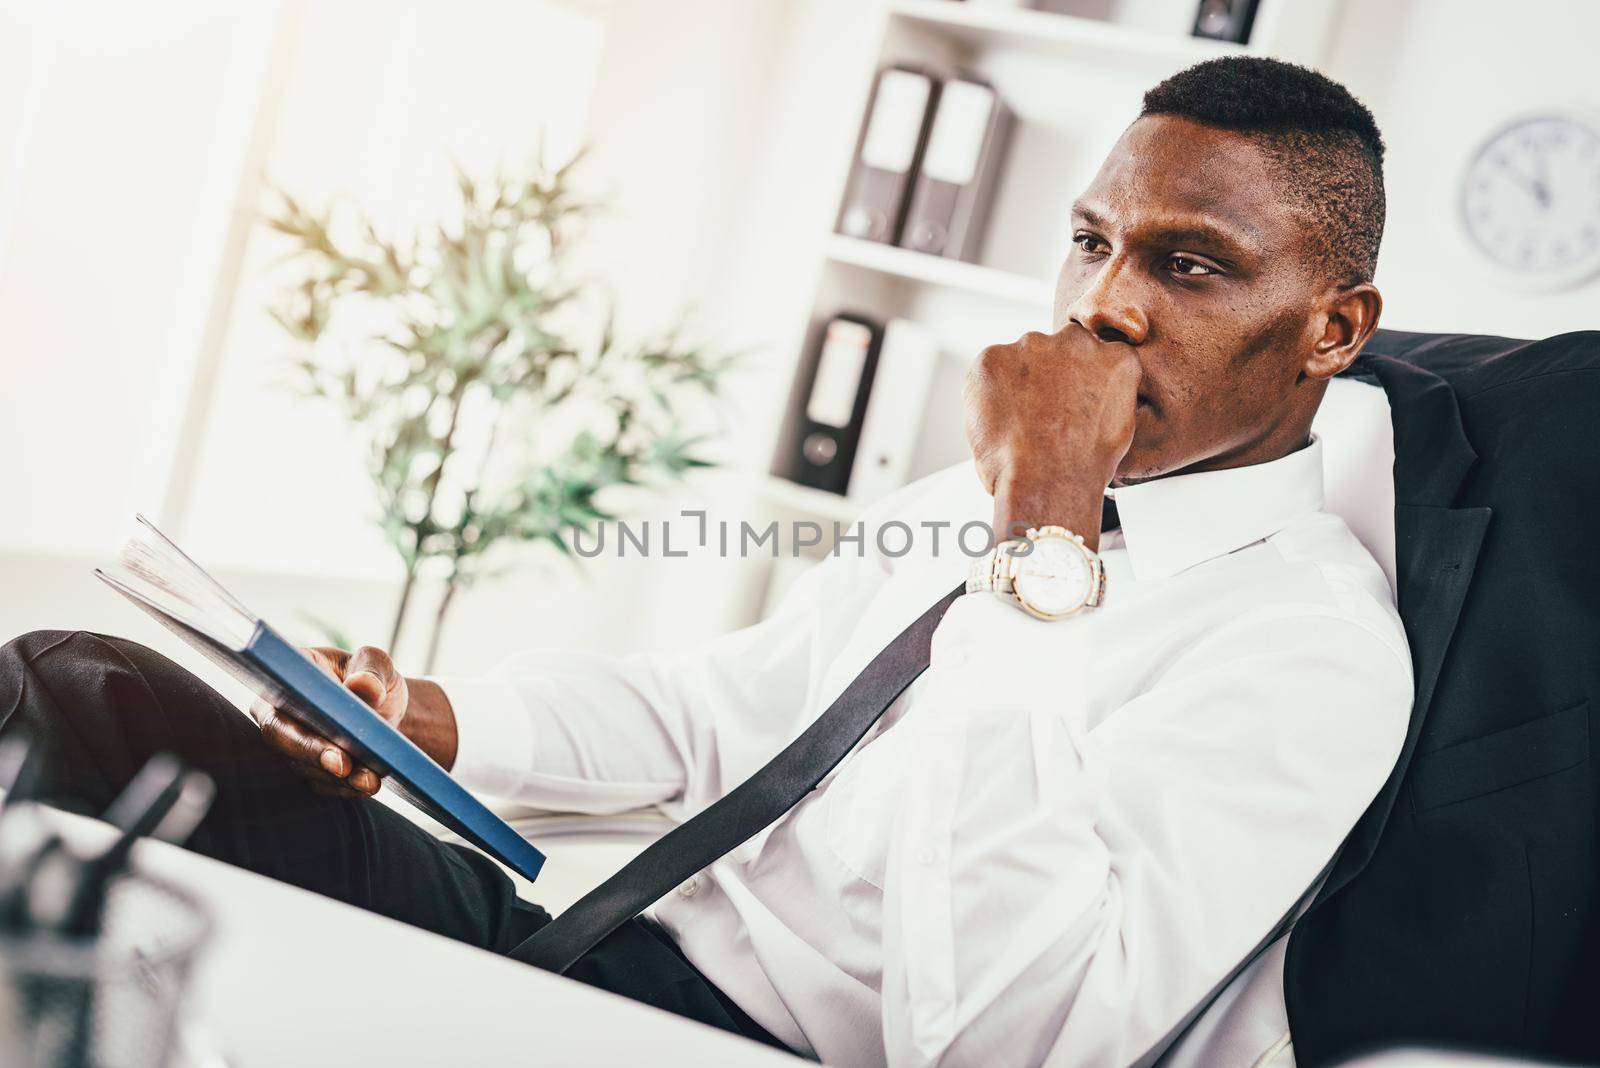 Pensive African businessman working in modern office holding notebook and planning what to do next.